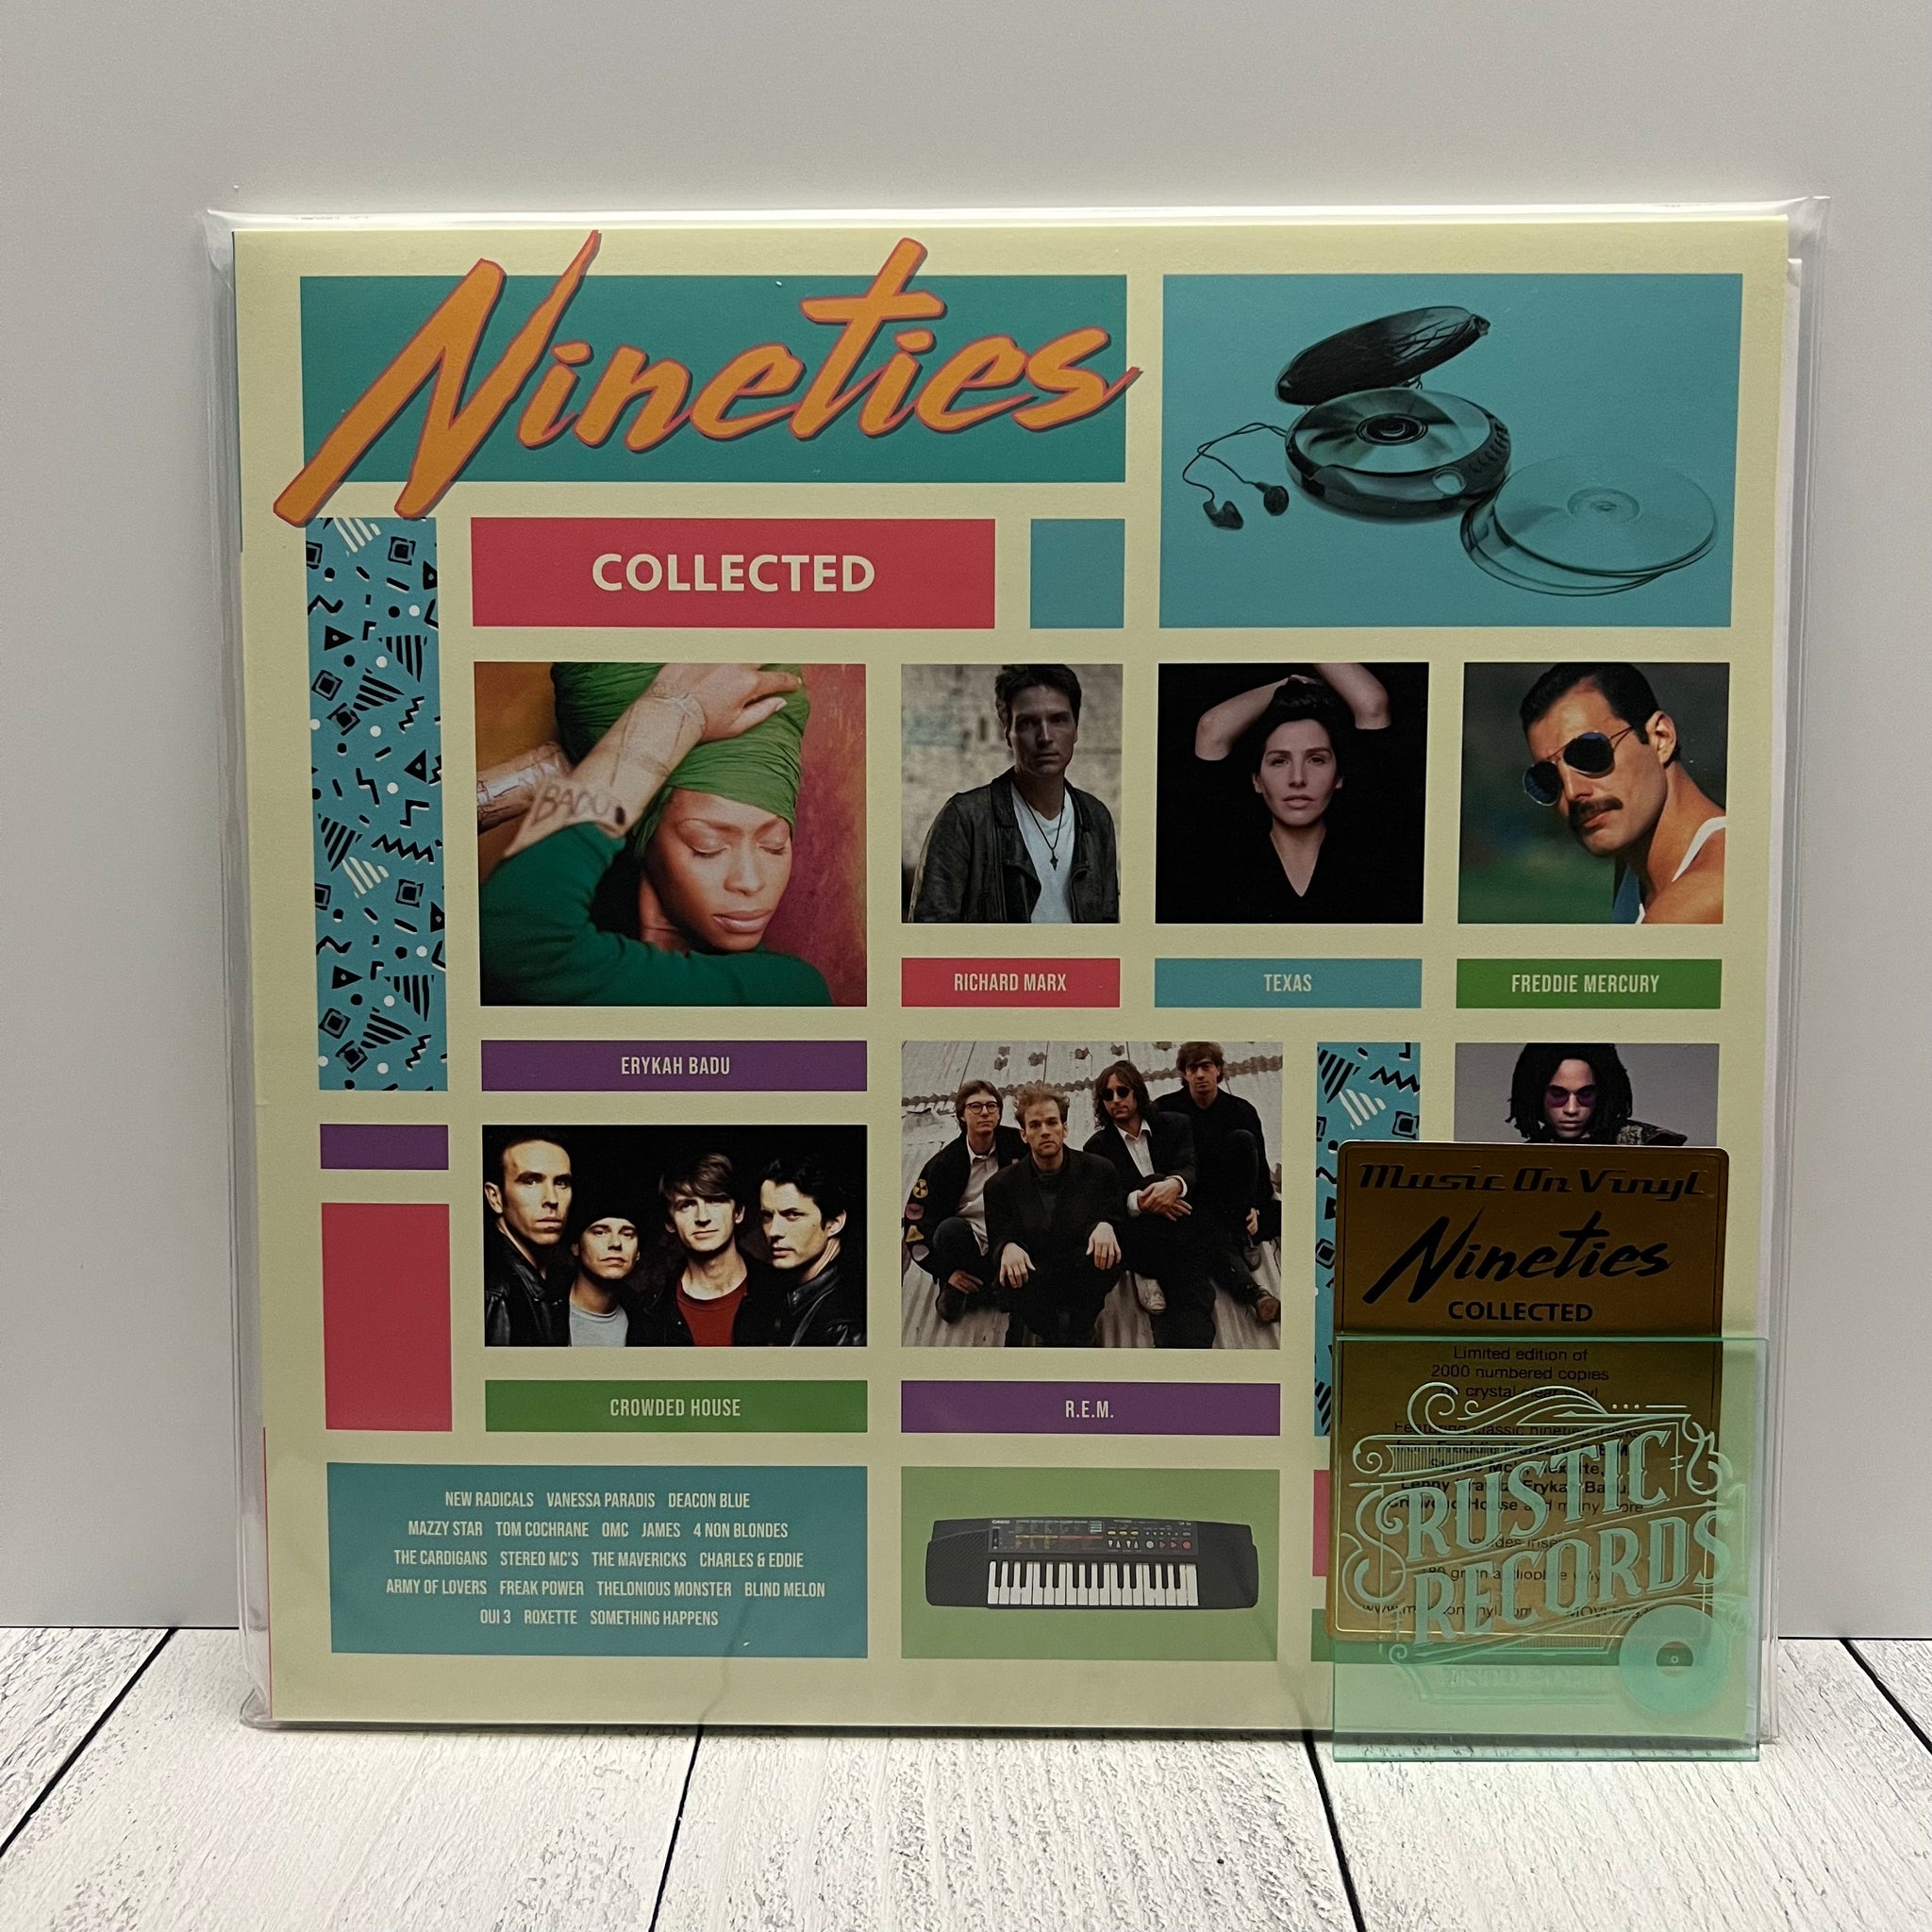 Nineties Collected (Music On Vinyl Numbered)